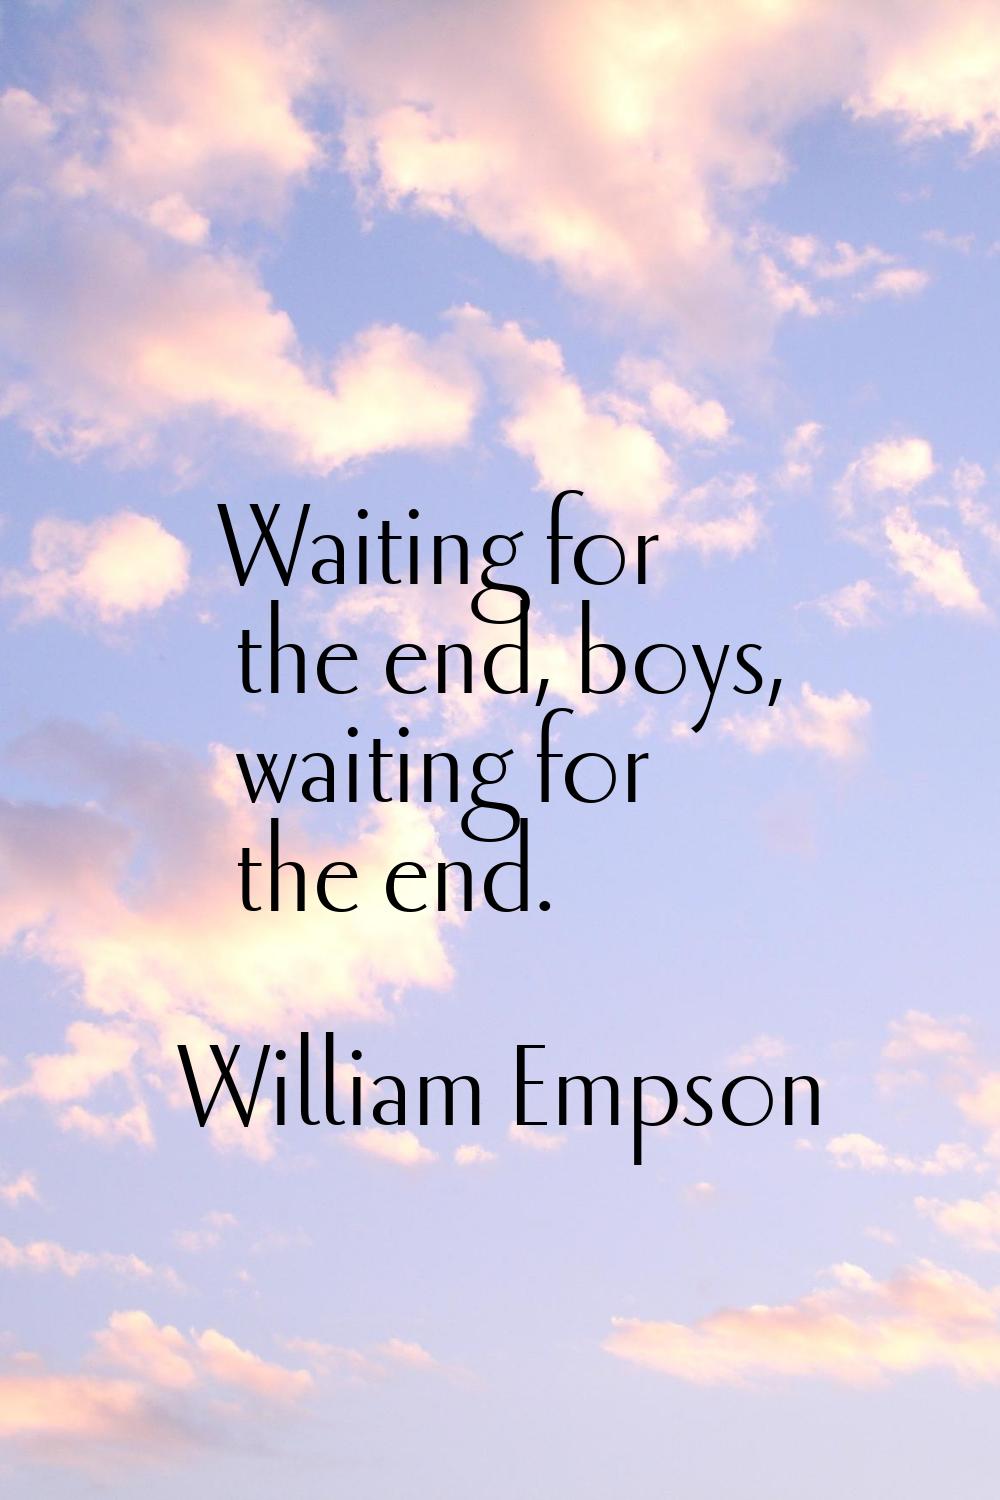 Waiting for the end, boys, waiting for the end.